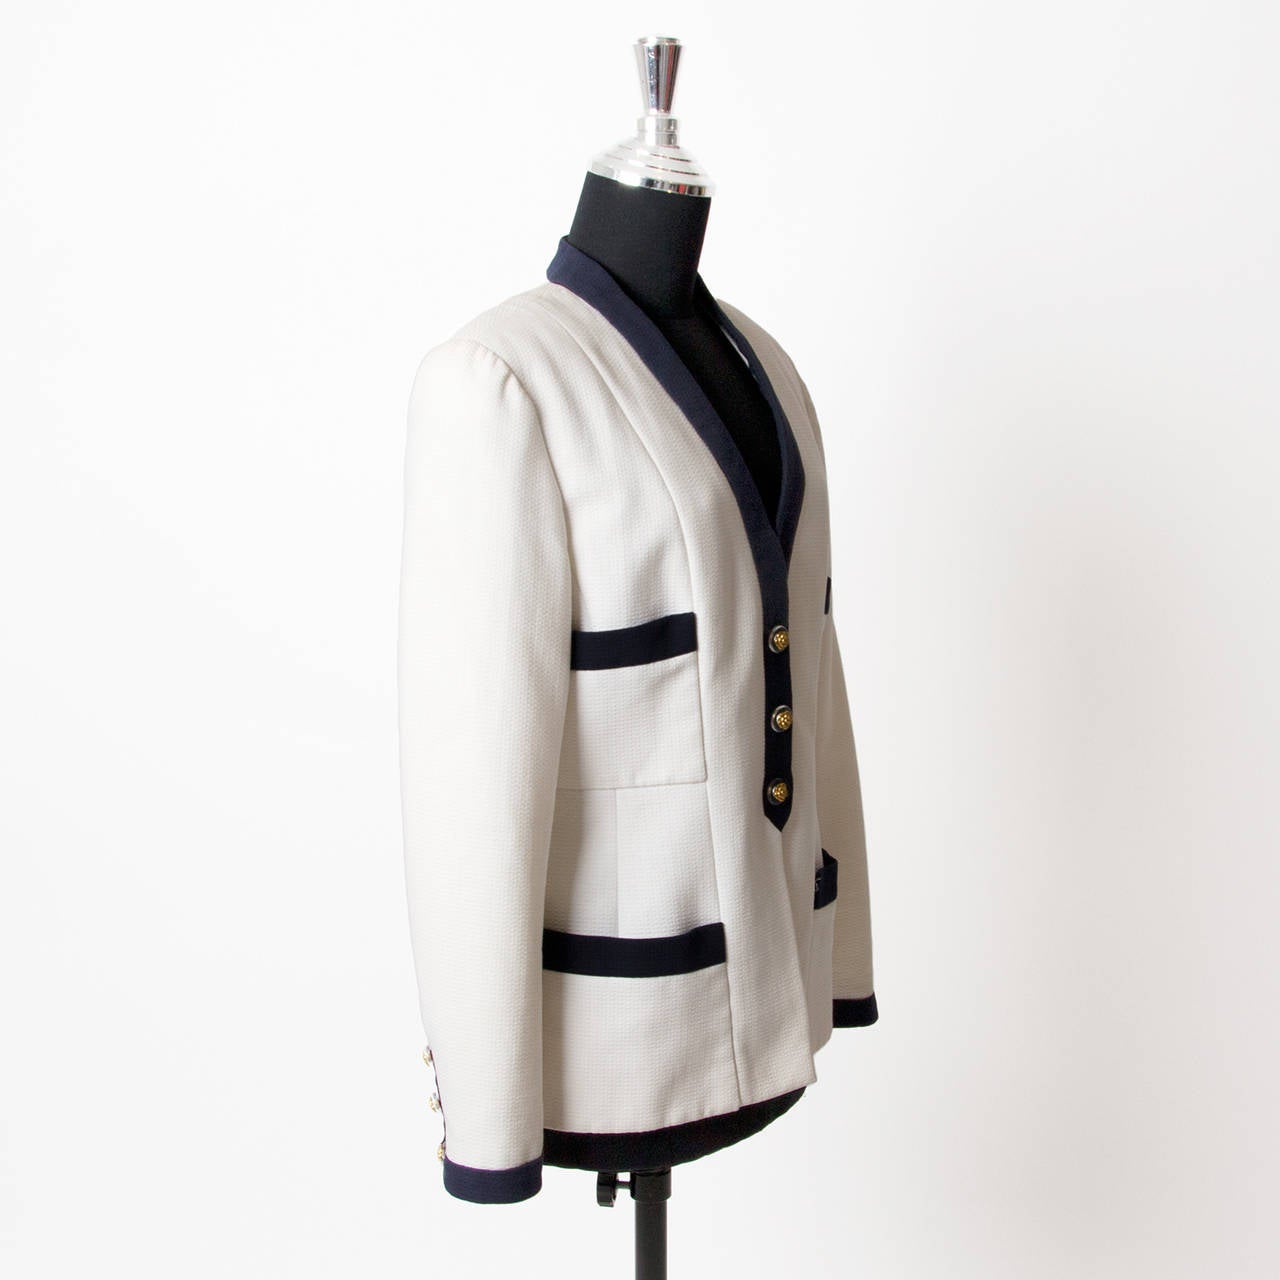 Beautiful Chanel White blazer with blue details. 3 buttons with gold camelia on the front and on the sleeves. A Chanel jacket is a timeless classic! The jacket has been dry-cleaned